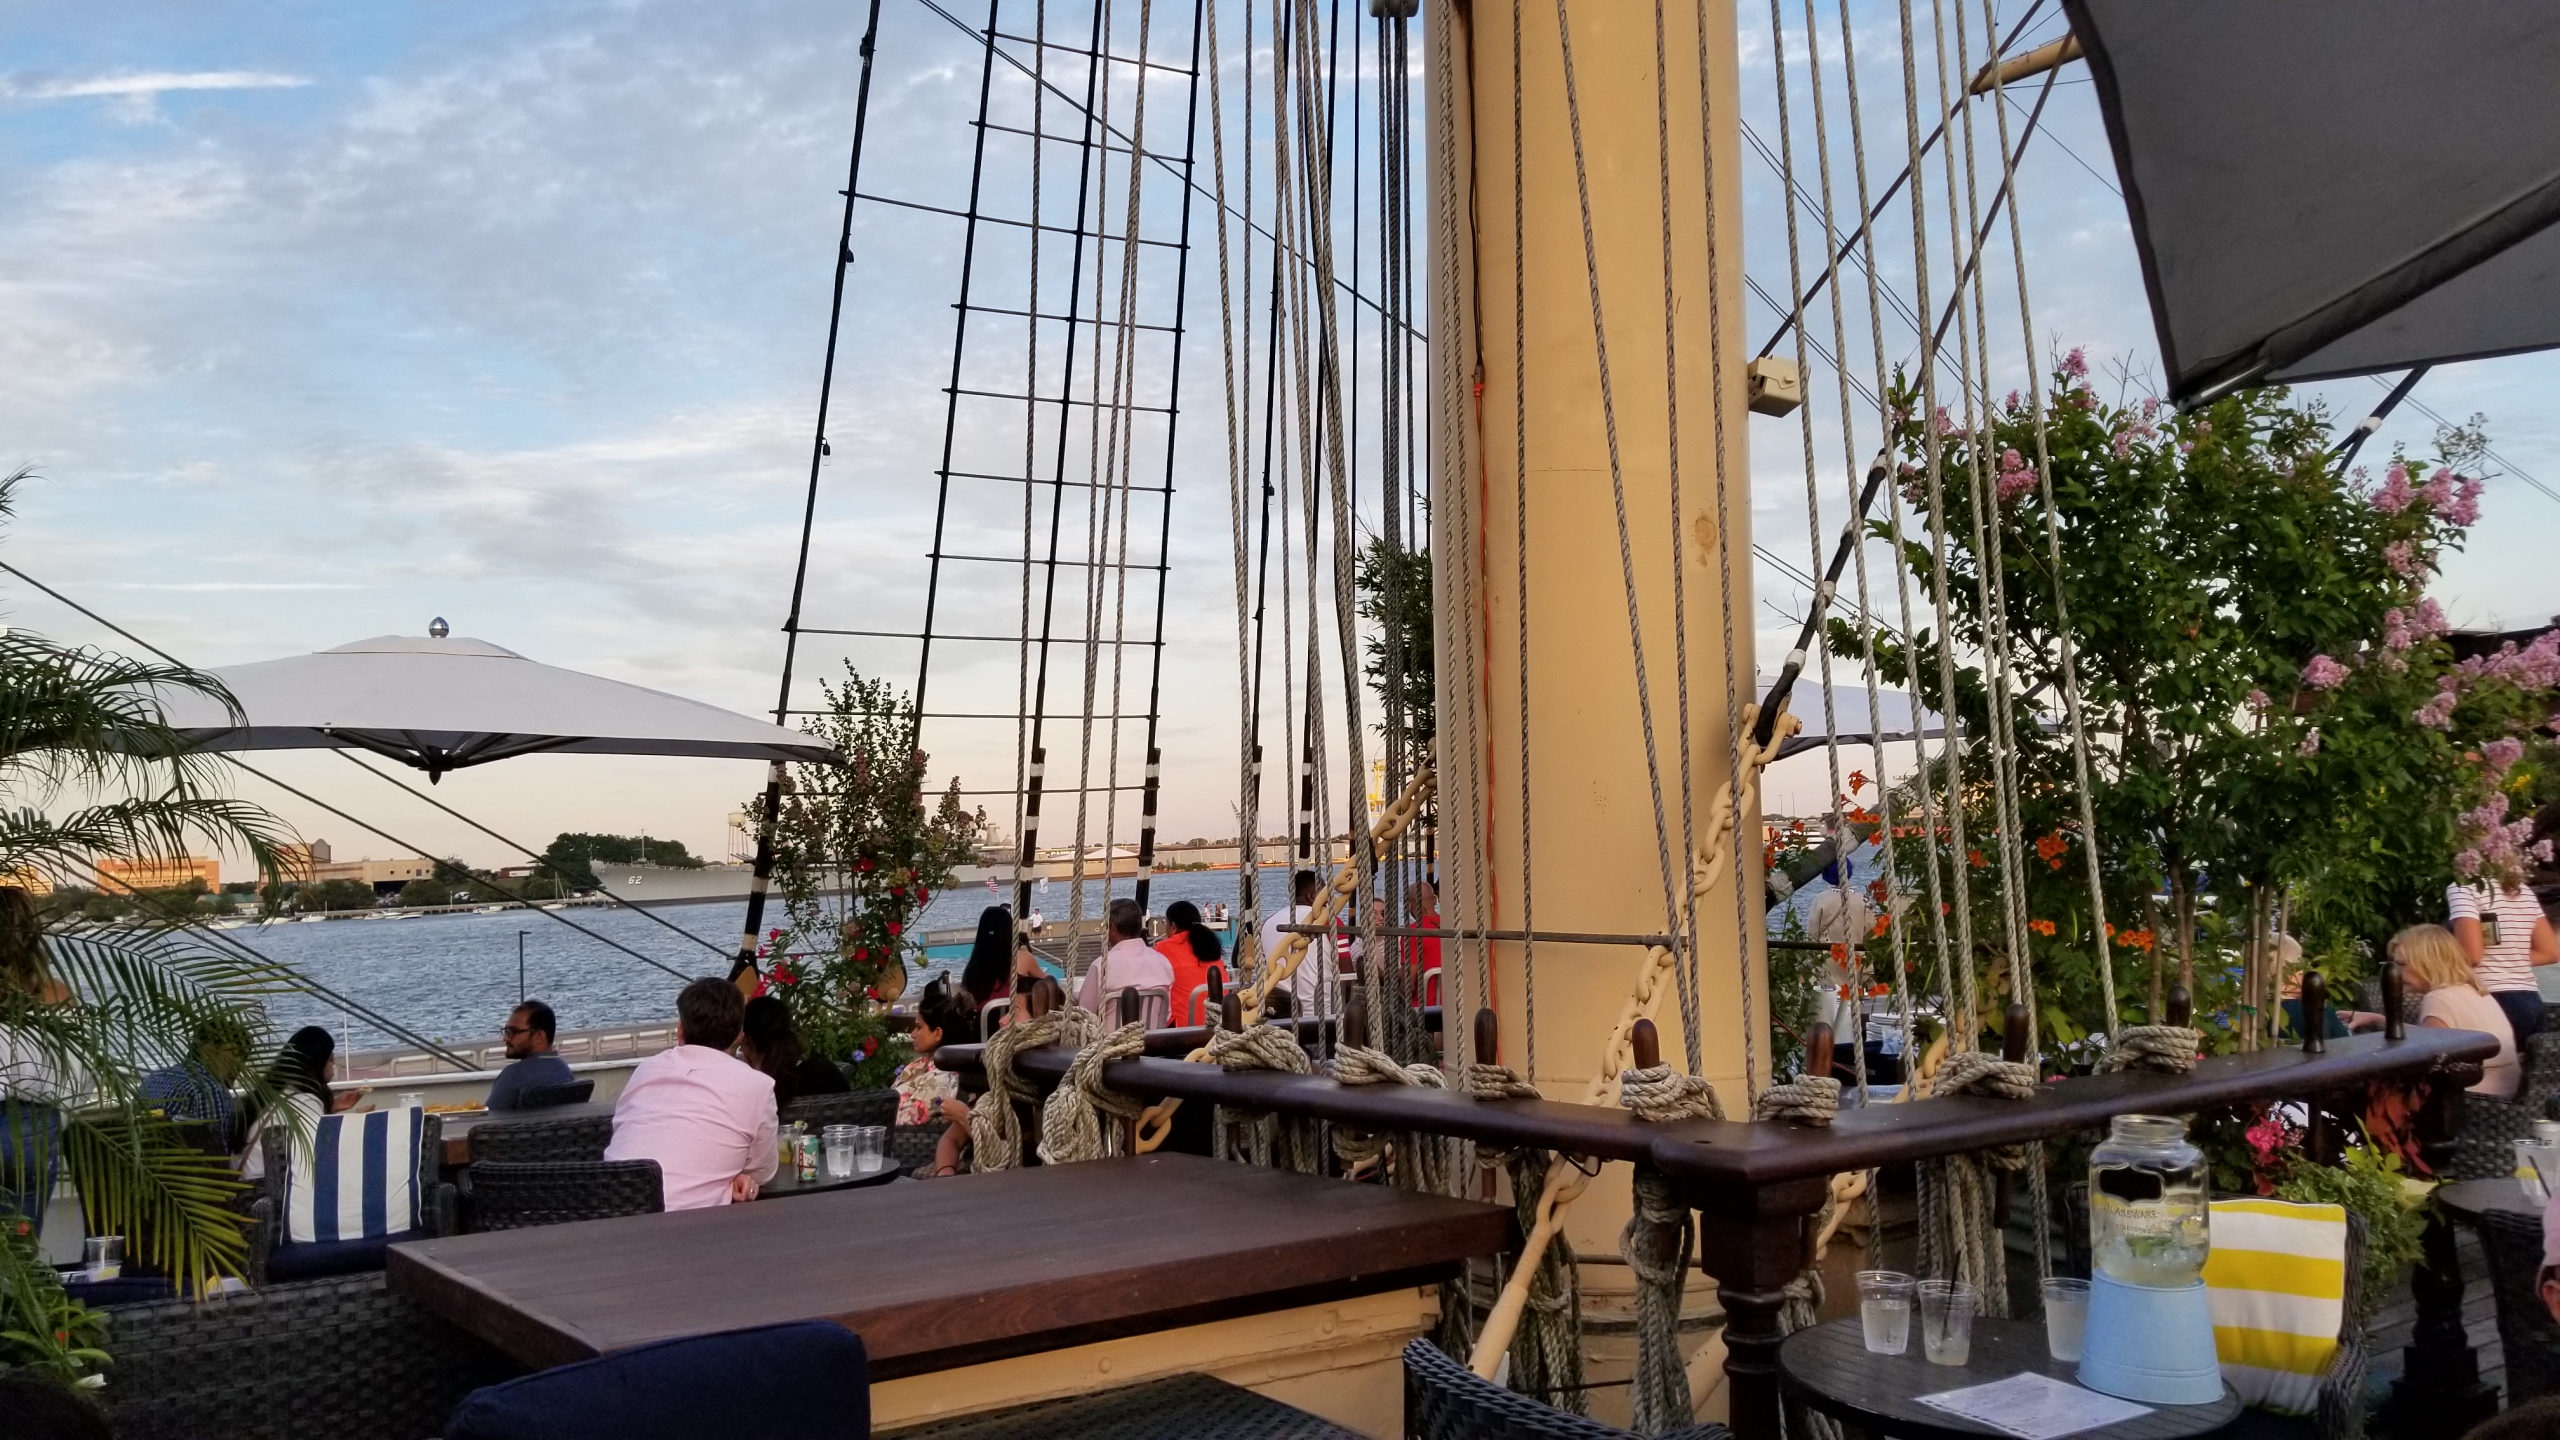 Tour Philadelphia's historic Seaport from the upper deck bar at the Moshulu, a restored clipper ship.